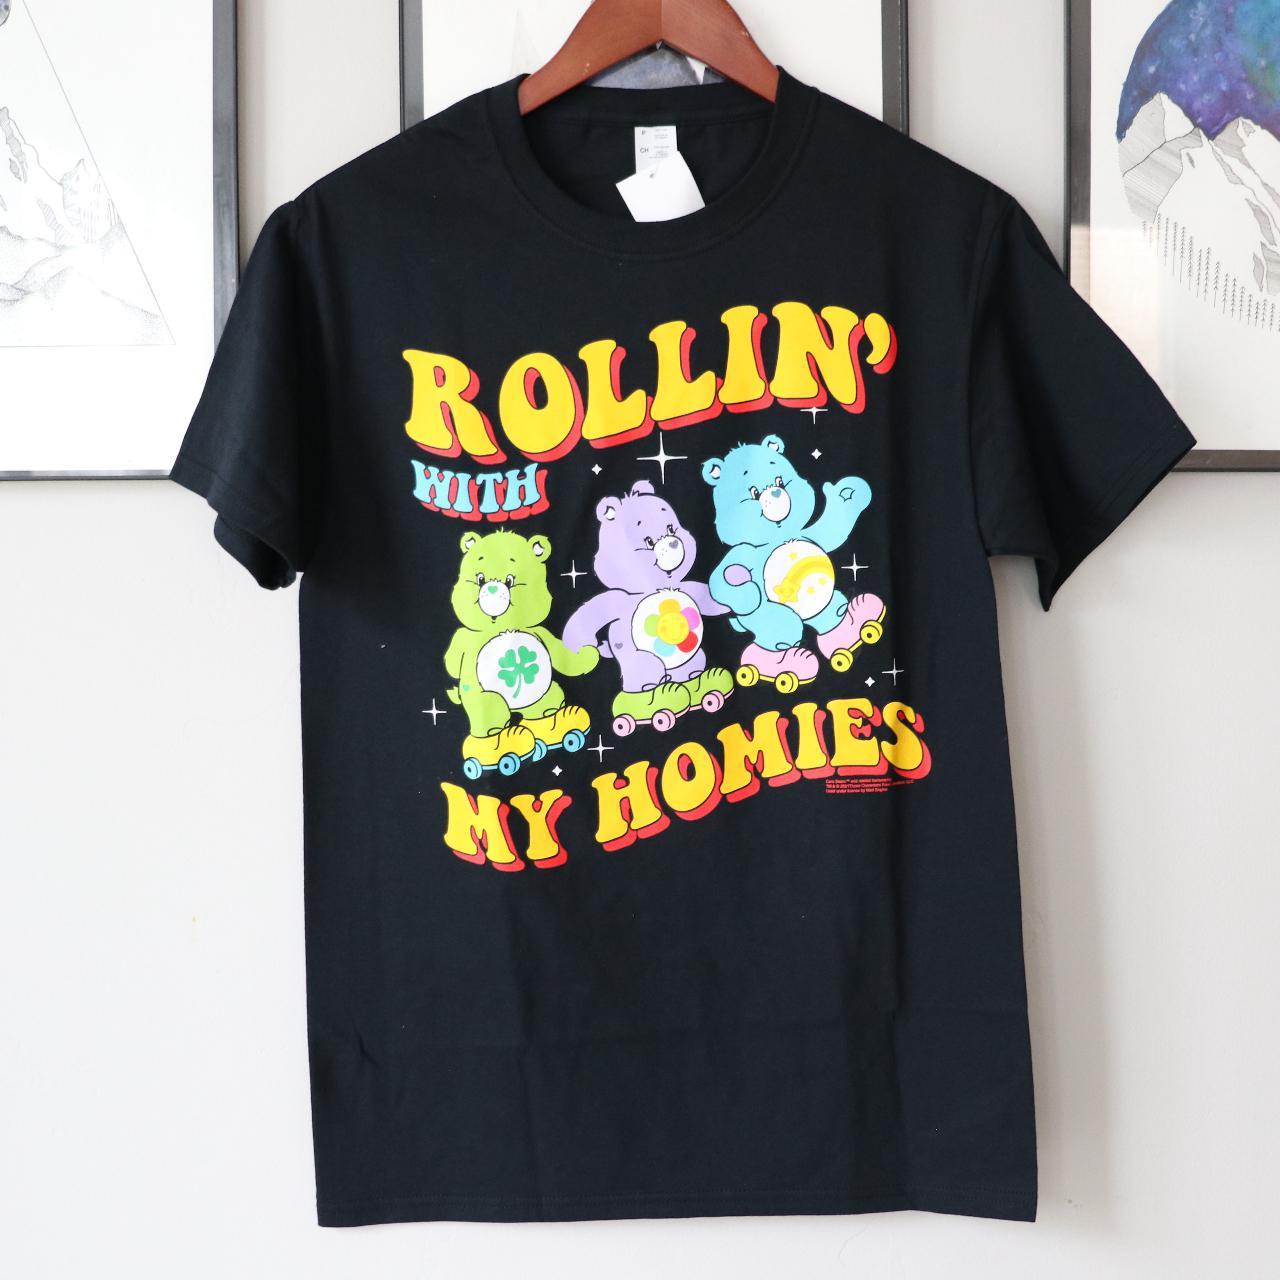 Product Image 1 - Cool Care Bears T-shirt sizes